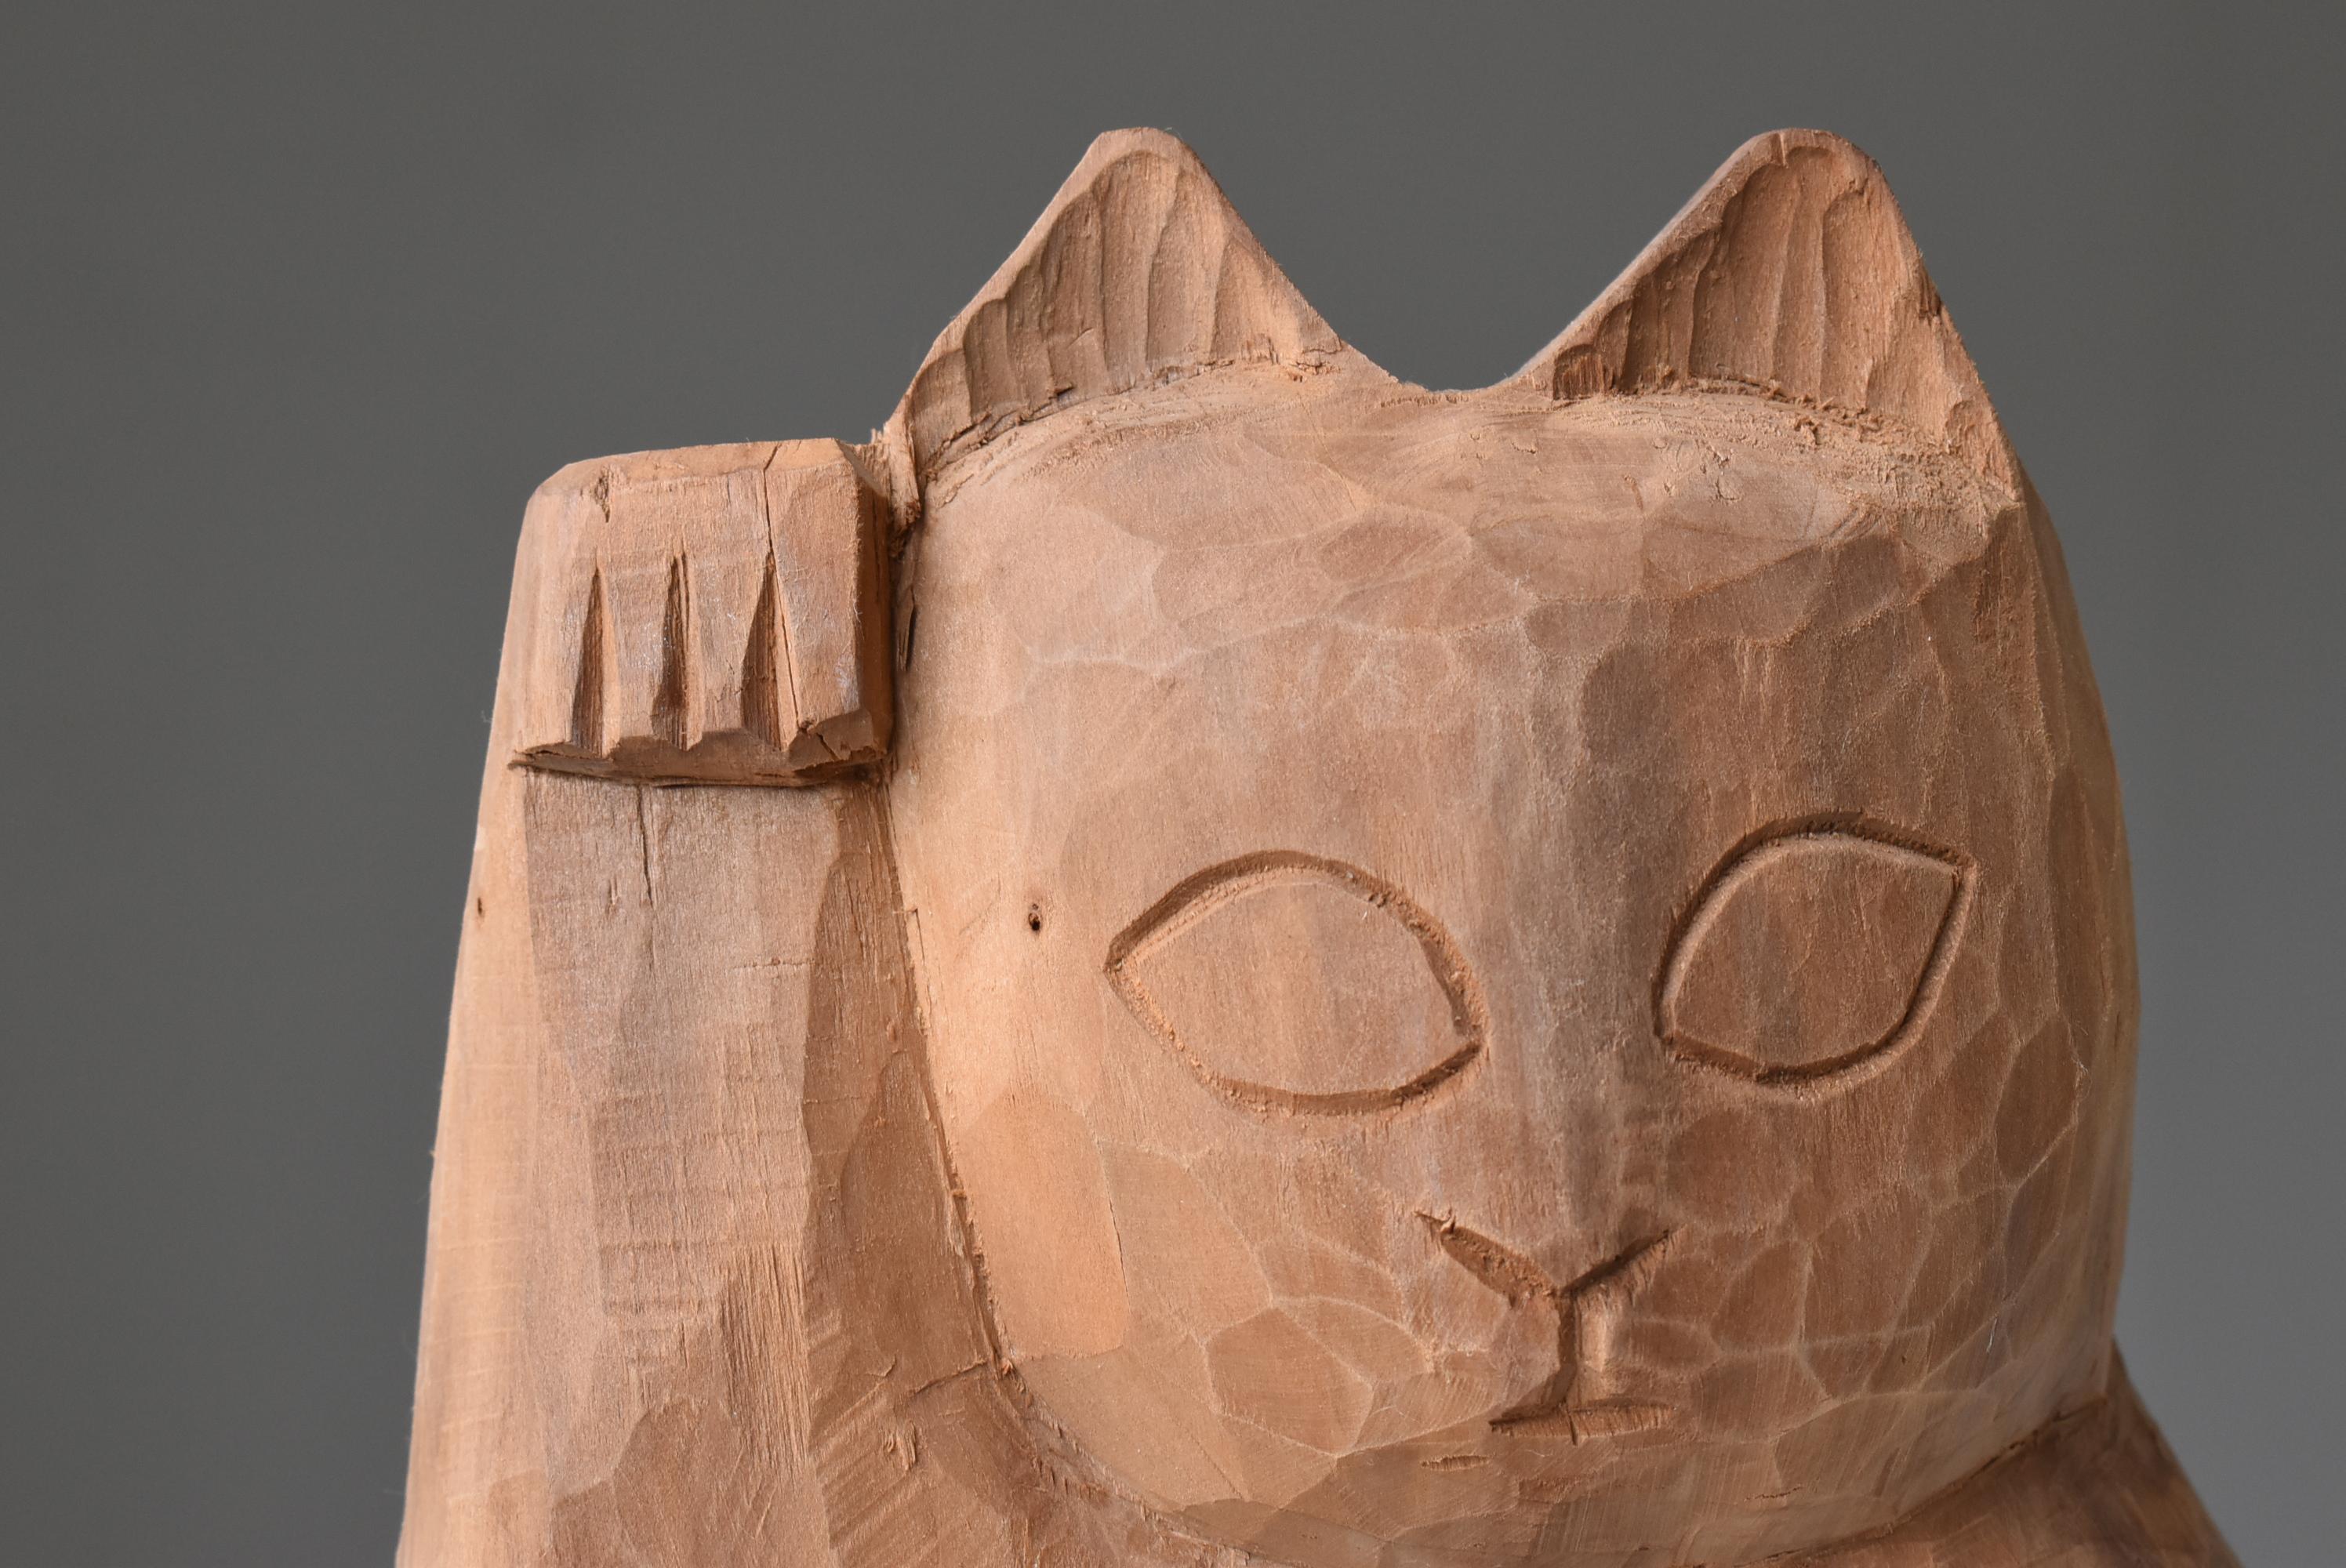 This is an old Japanese wood carving of a beckoning cat.
It is from the 1950s to 1970s.
The material seems to be cedar.

It has been popular in Japan for a long time as a lucky charm for 